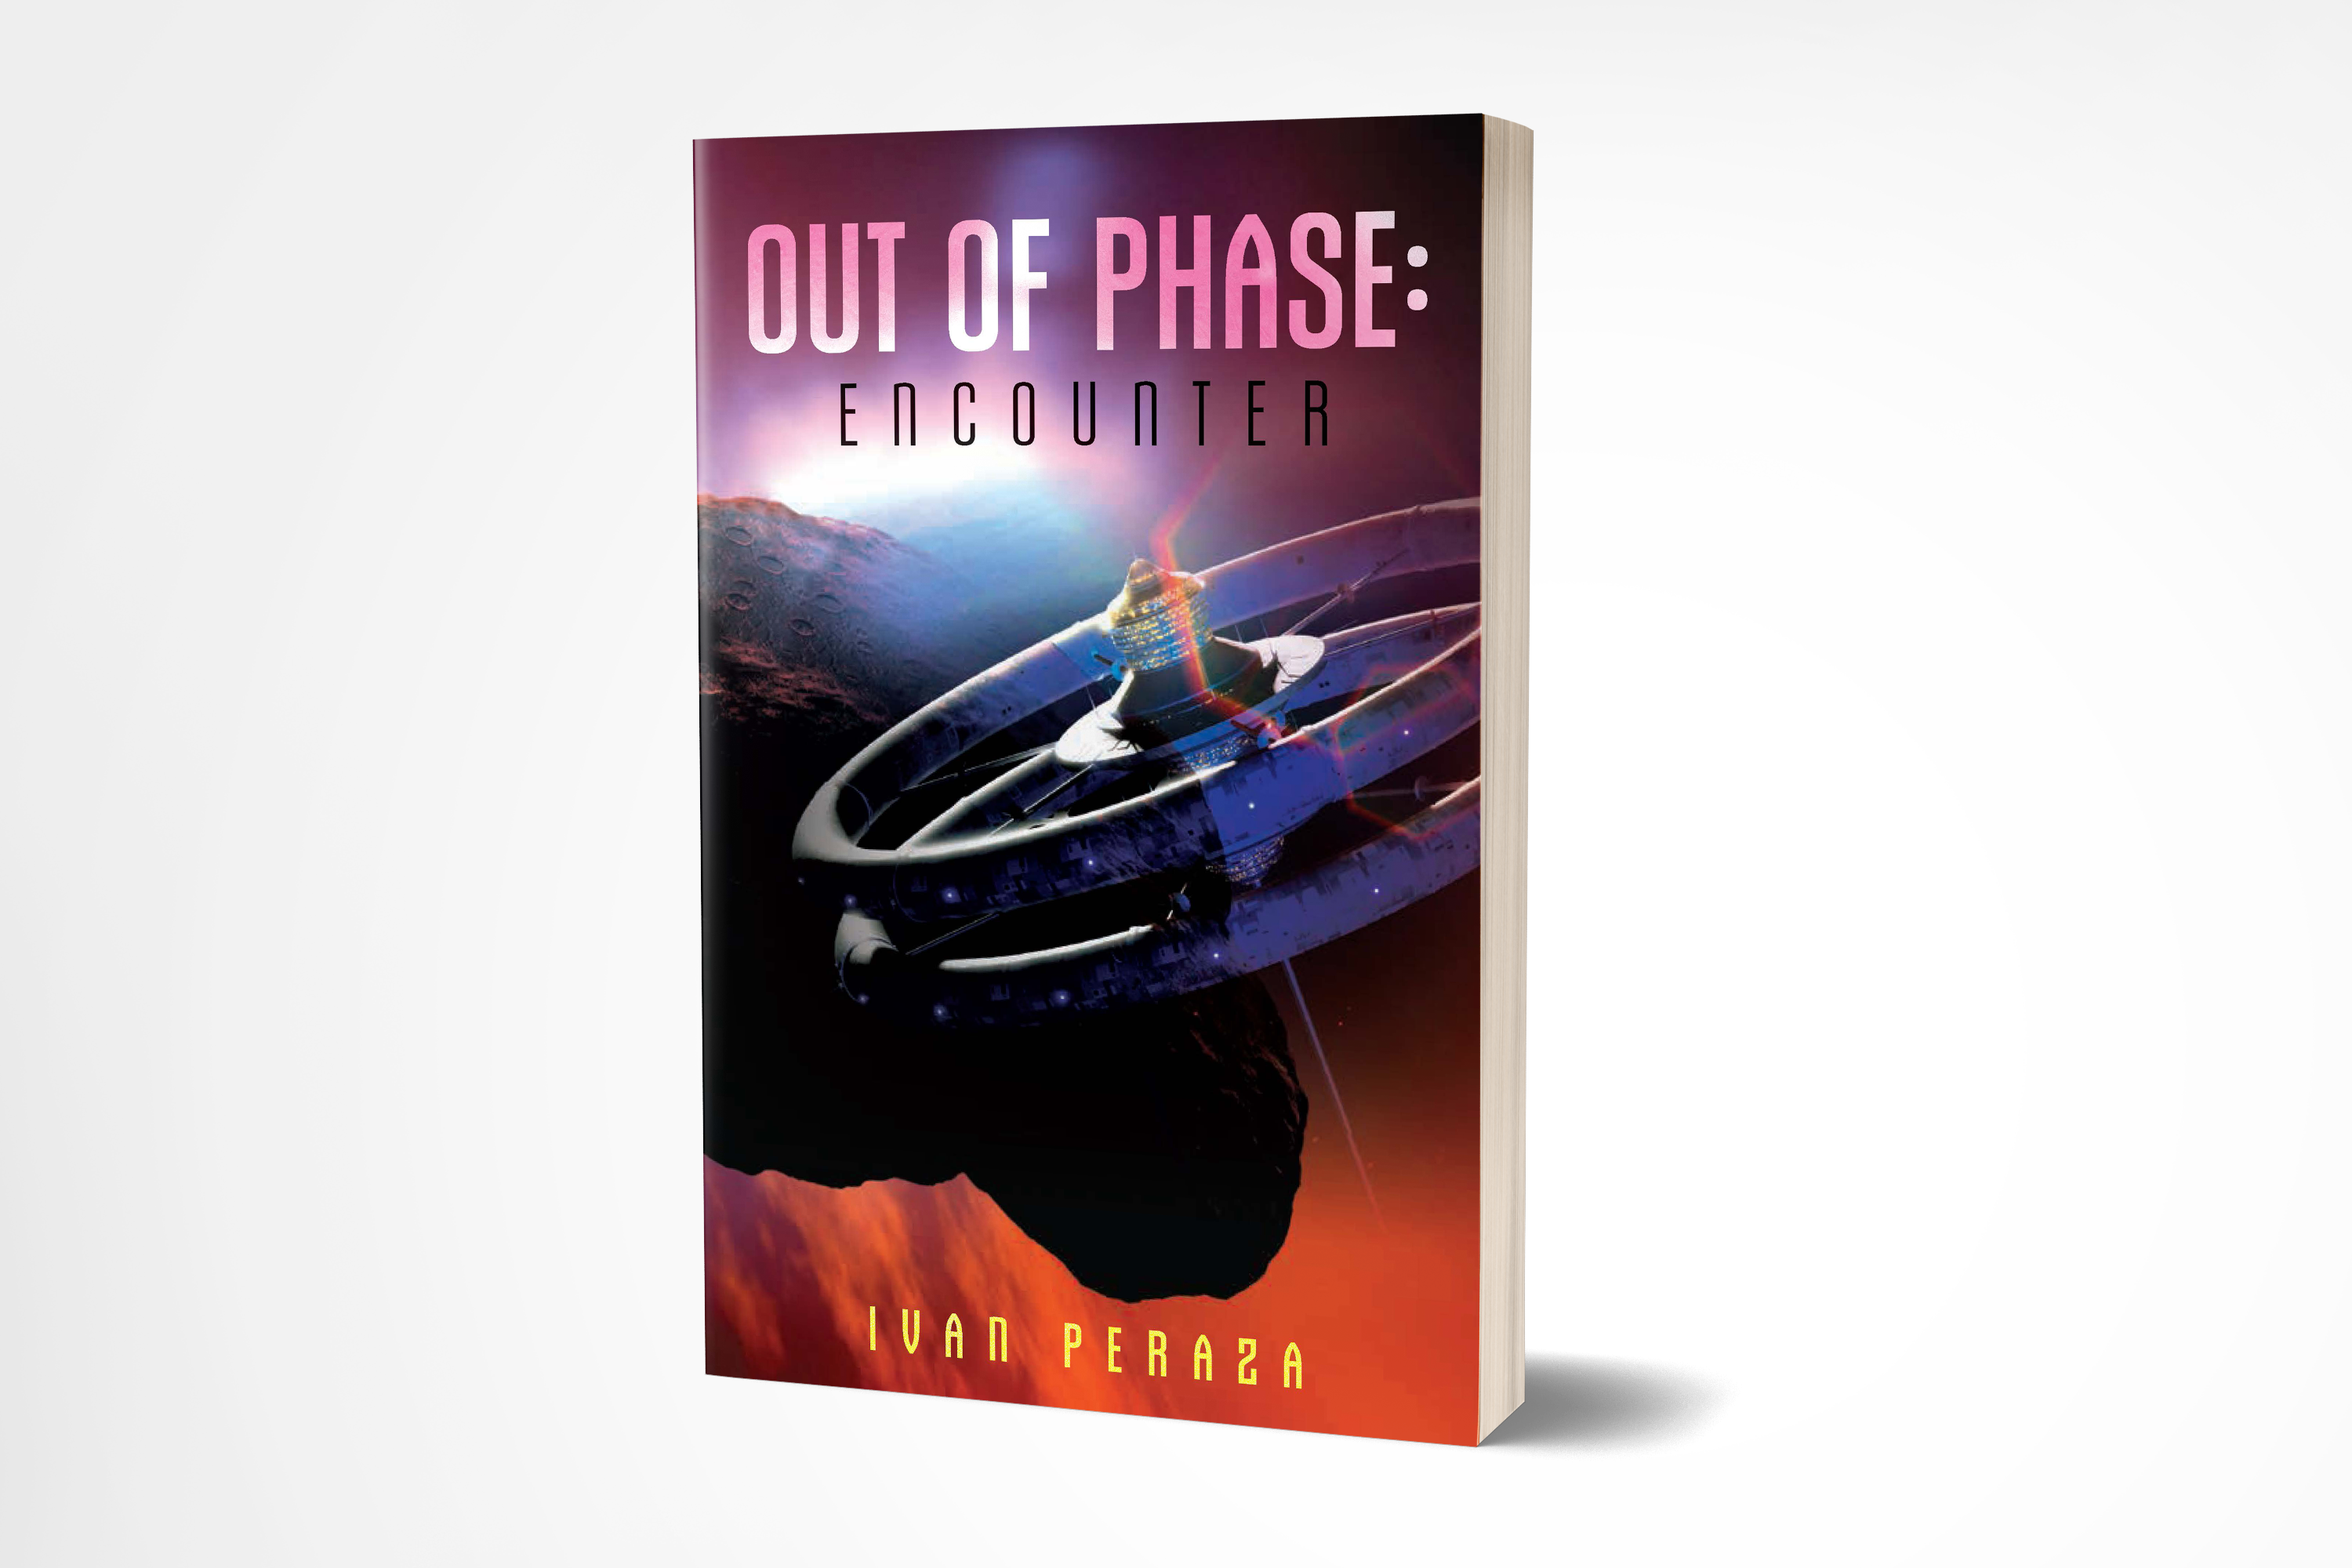 Out of Phase: Encounter